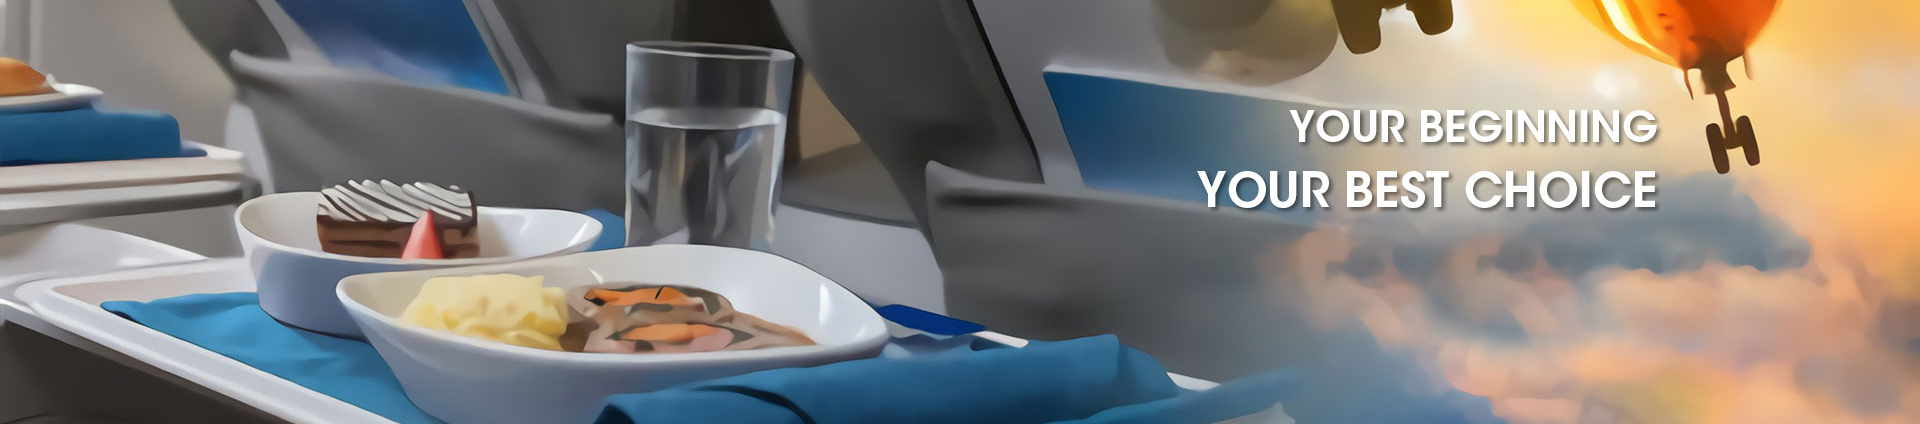 Using PLA Utensils on Airplanes: Safeguarding the Health of Passengers